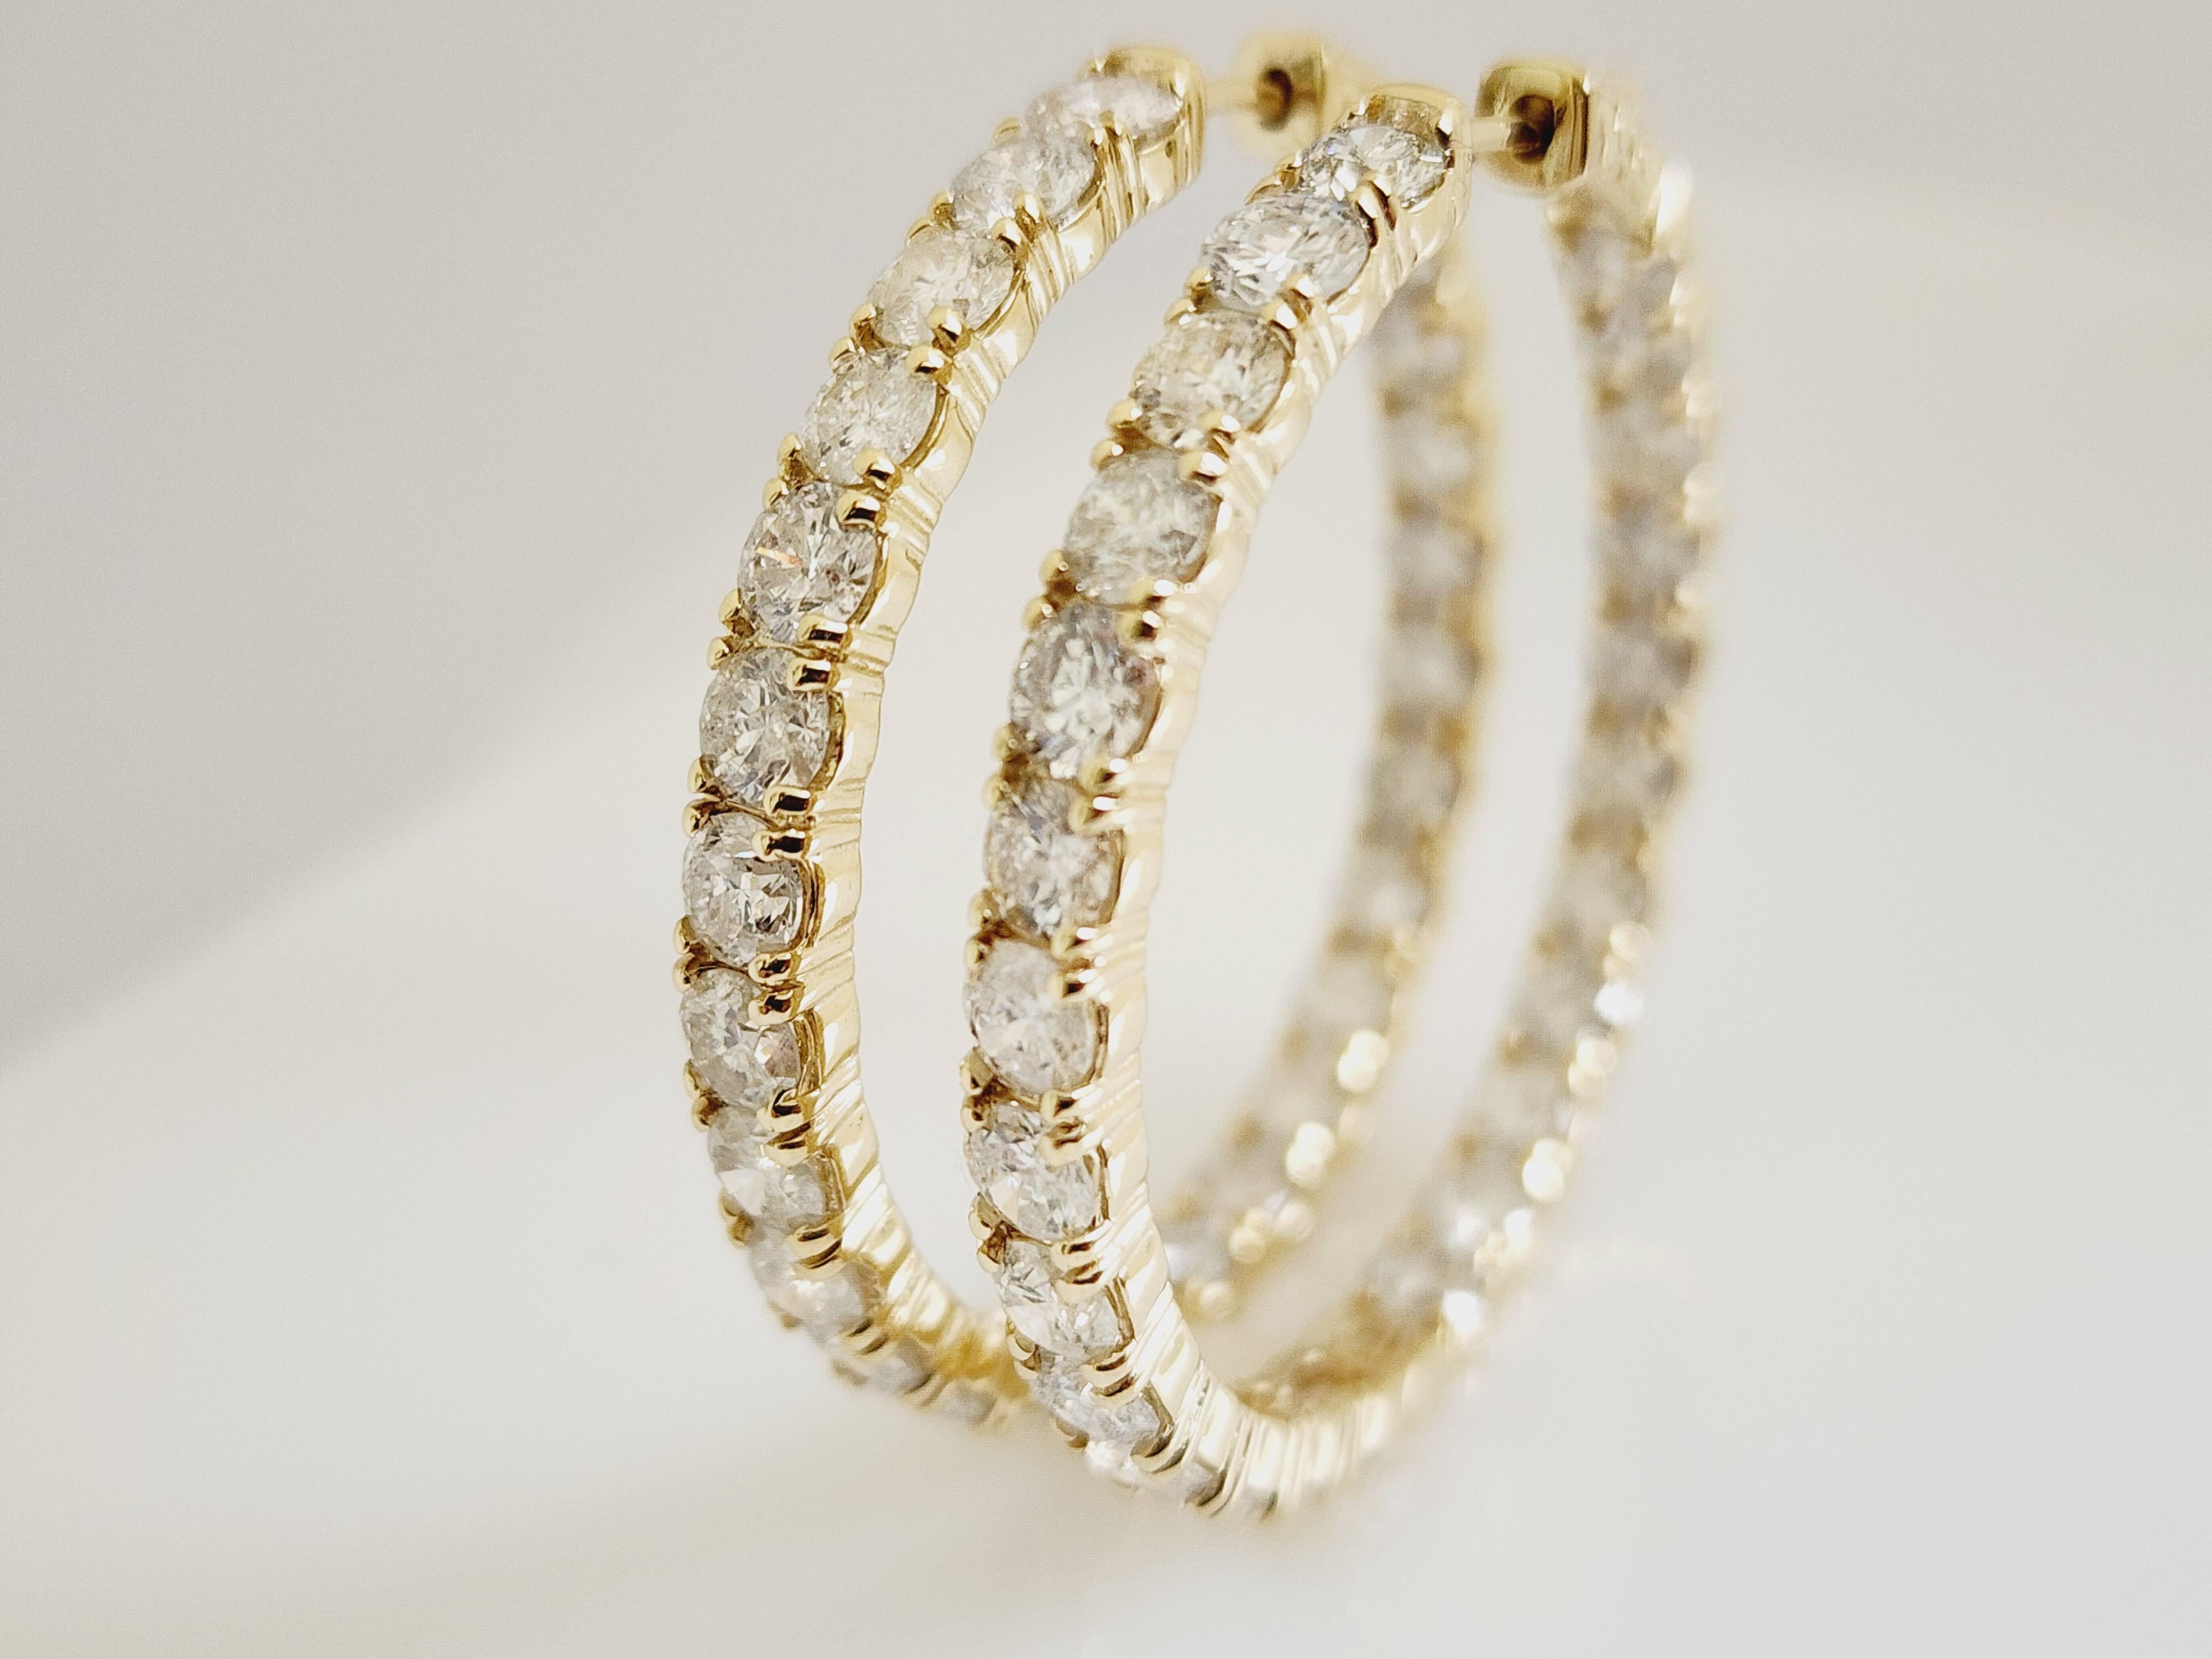 10 Carat Diamond Hoops Earrings 14 Karat Yellow Gold In New Condition For Sale In Great Neck, NY